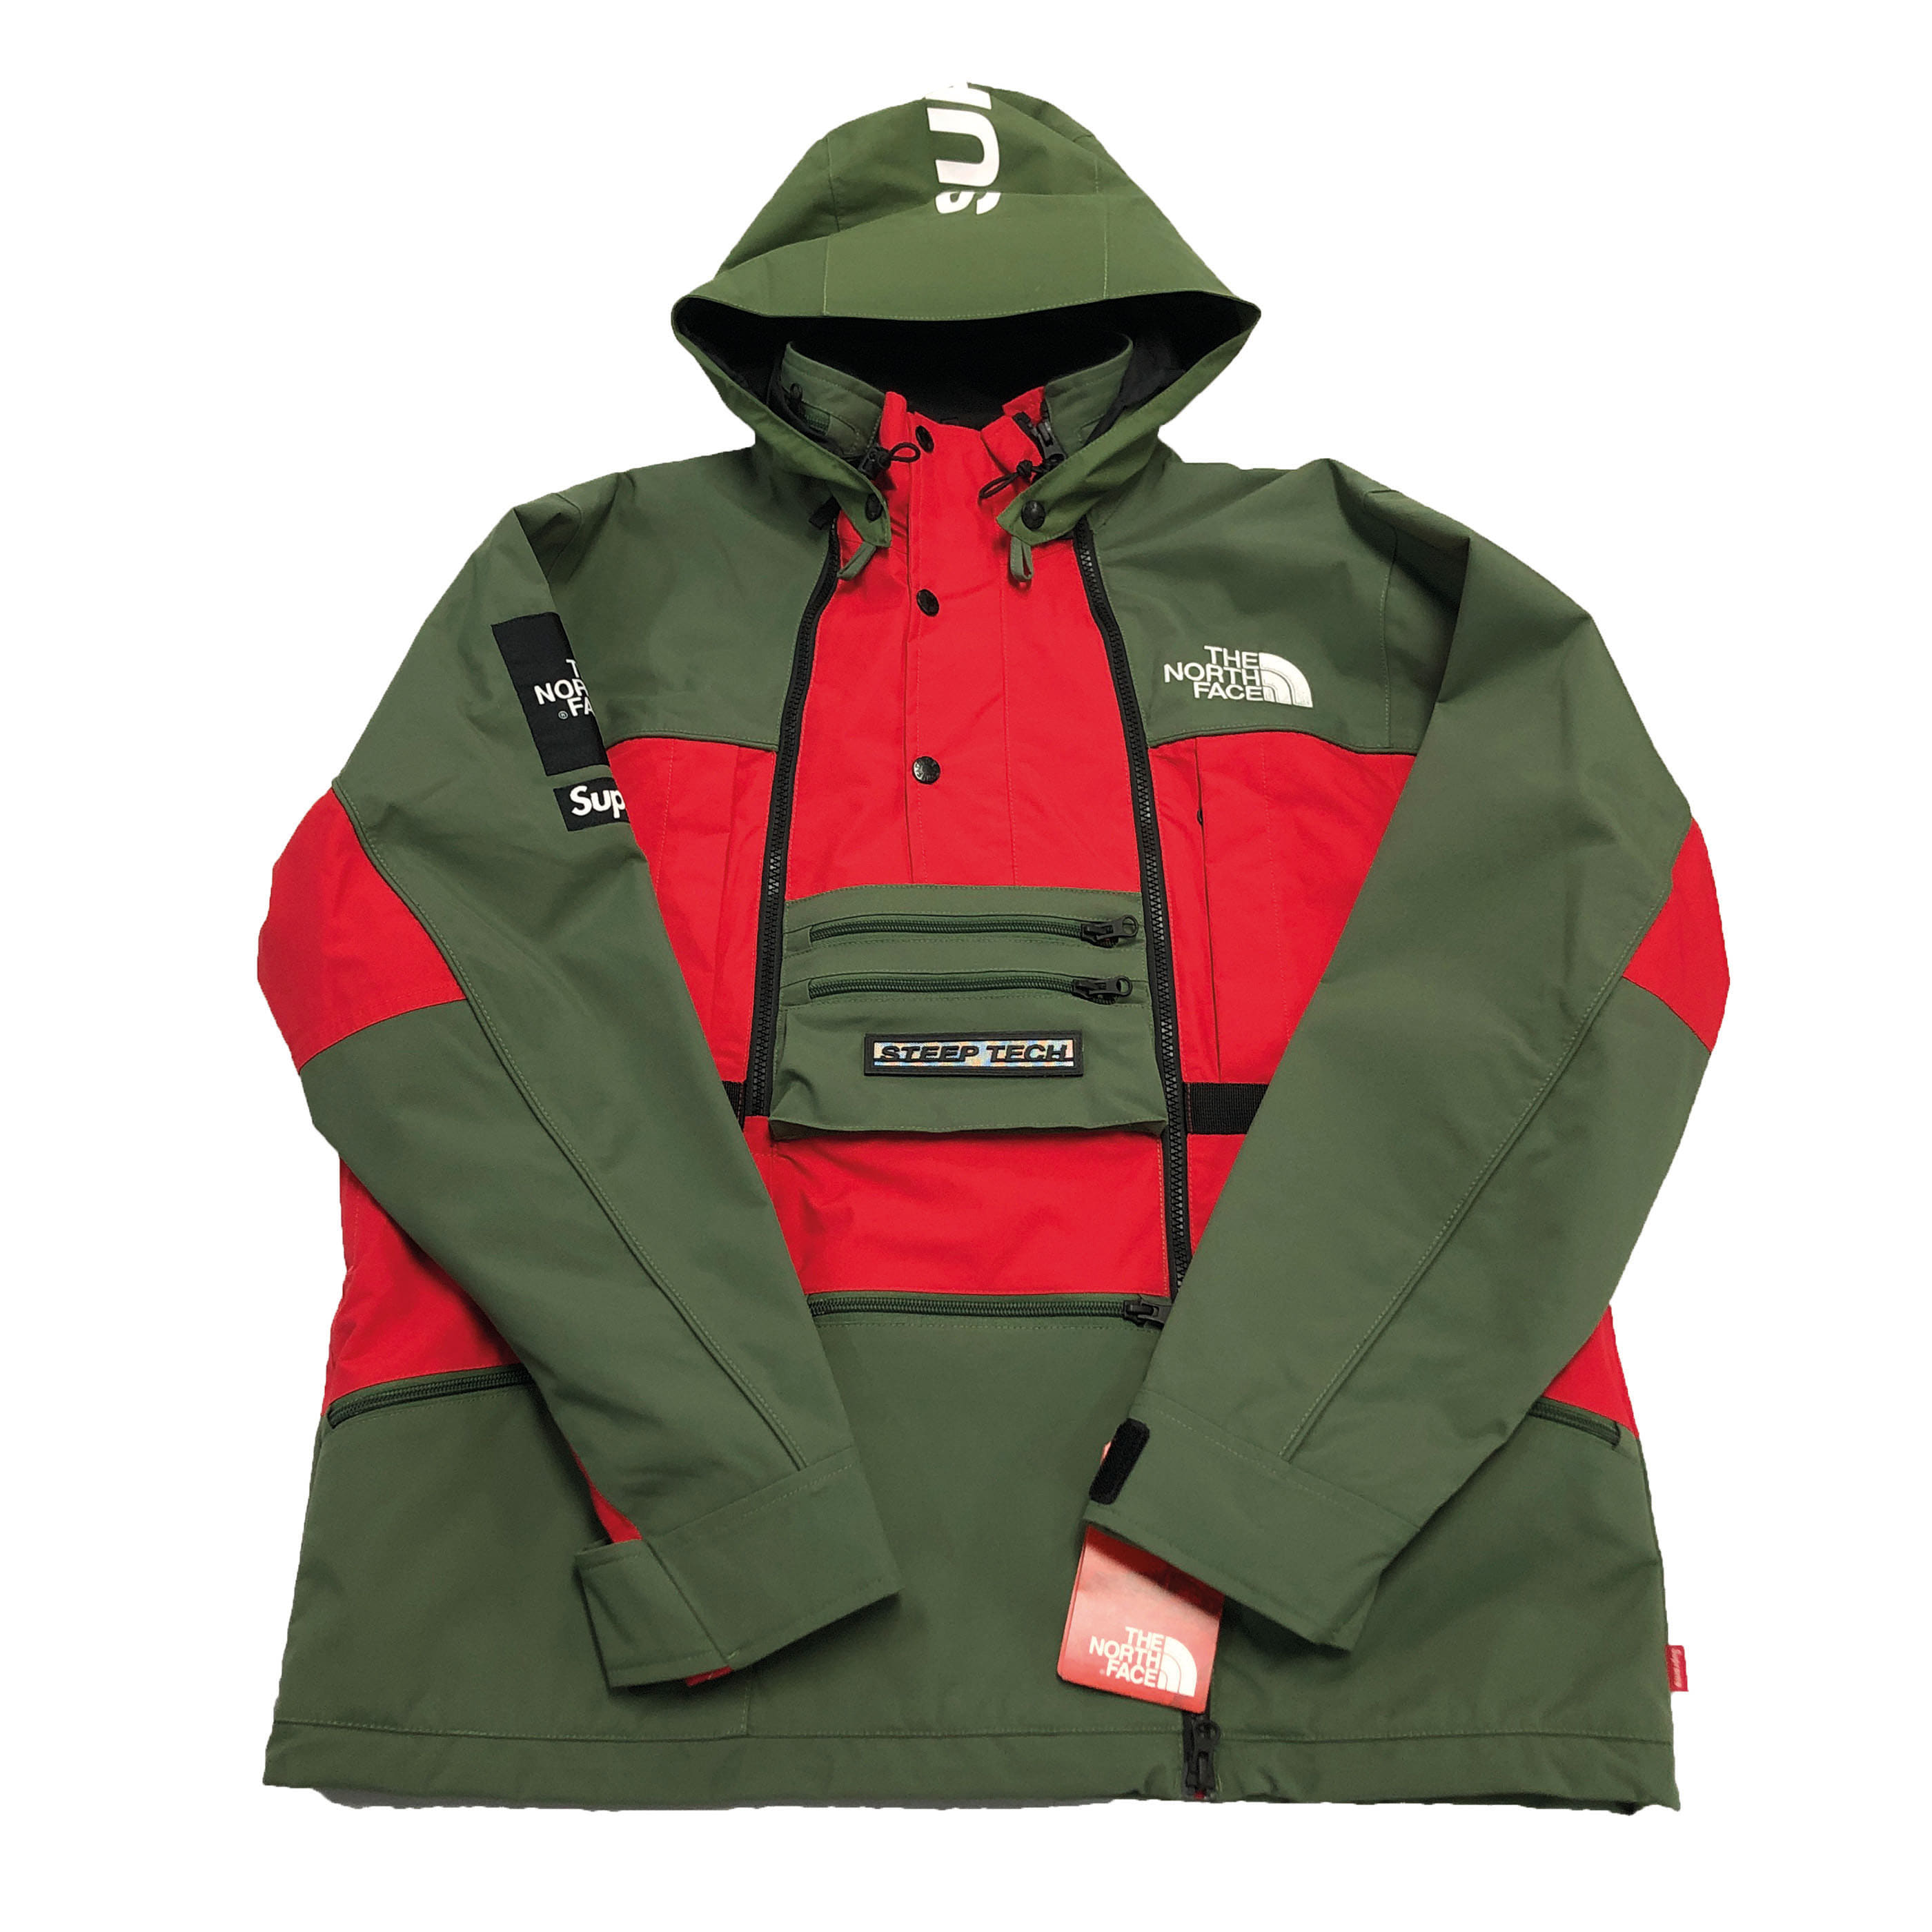 [Supreme x The North Face] 16SS Steep Tech Jacket Olive - Size M